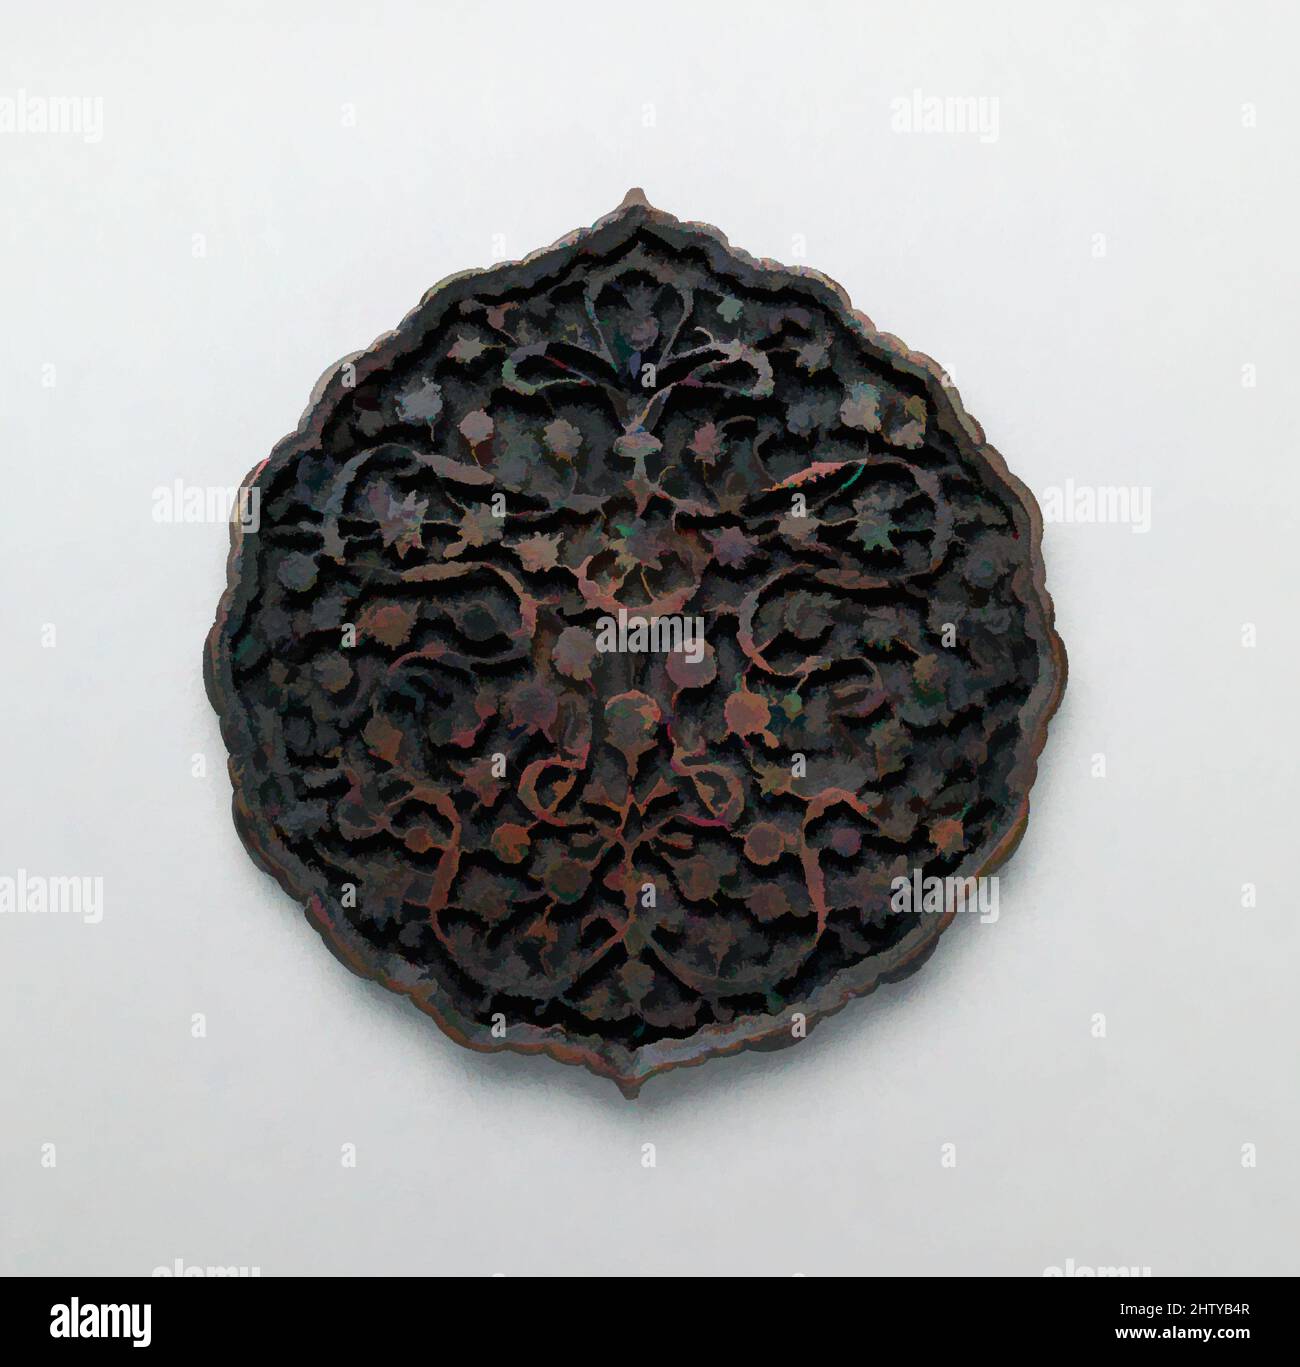 Art inspired by Bookbinding Element, 16th century, Attributed to Iran or Turkey, Copper; cast, Gr. Diam. 1 3/4 in. (4.4 cm), Metal, The size, shape and patterning of this metal plaque echoes the form of medallions which decorate the flap of some bookbindings. It is ornamented with, Classic works modernized by Artotop with a splash of modernity. Shapes, color and value, eye-catching visual impact on art. Emotions through freedom of artworks in a contemporary way. A timeless message pursuing a wildly creative new direction. Artists turning to the digital medium and creating the Artotop NFT Stock Photo